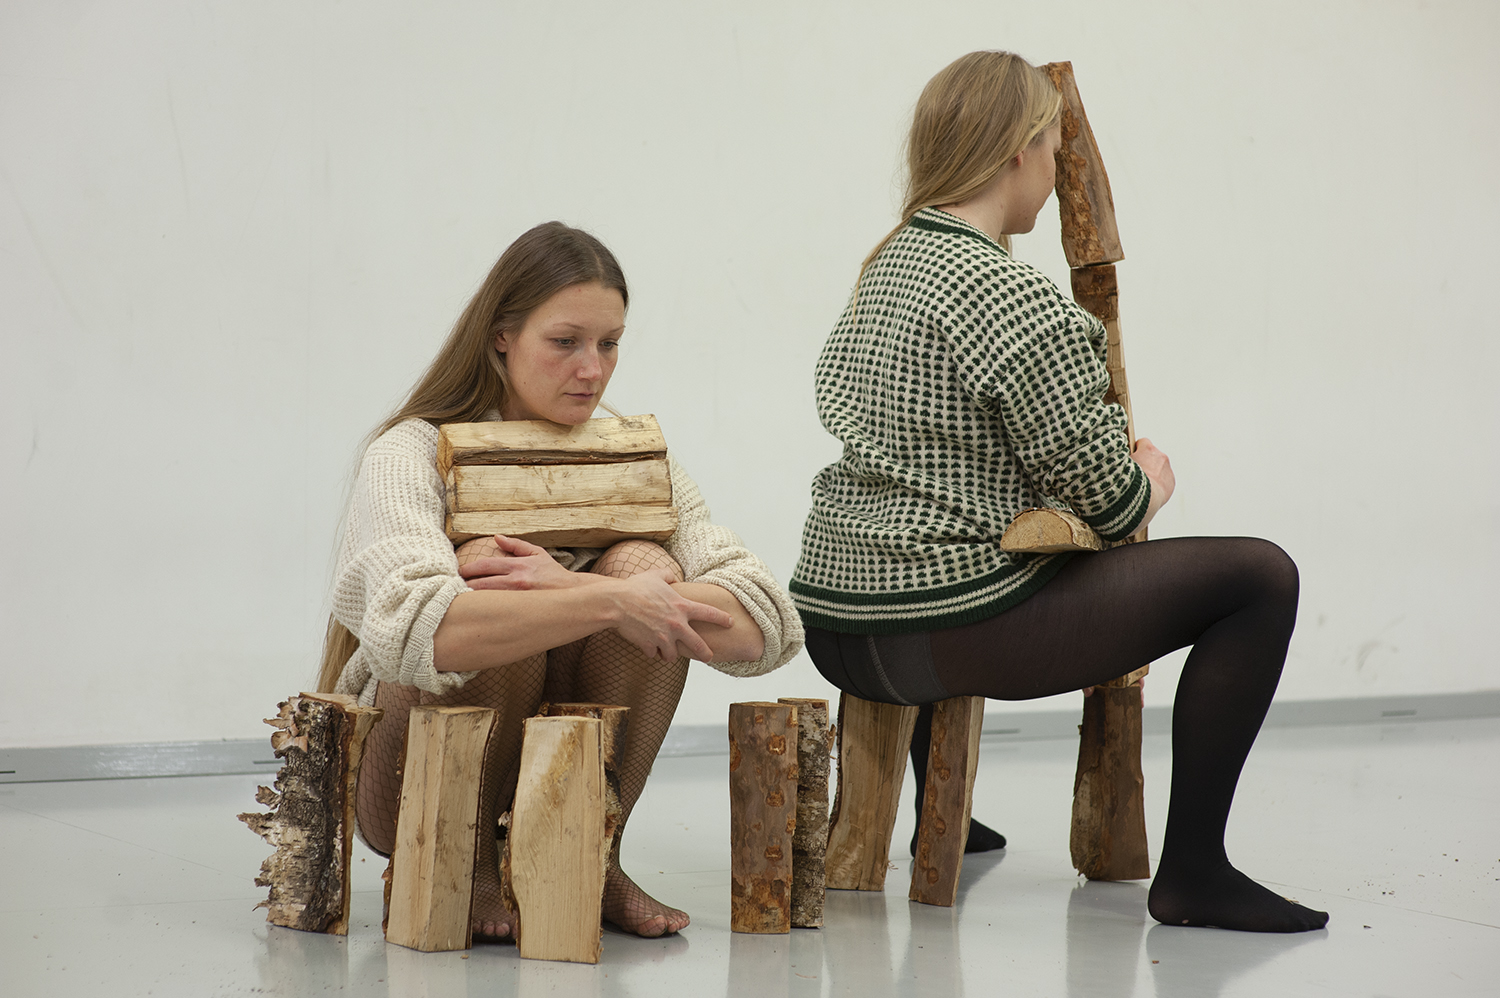 Two assumed women, sitting with blocks of wood in their lap and around them.